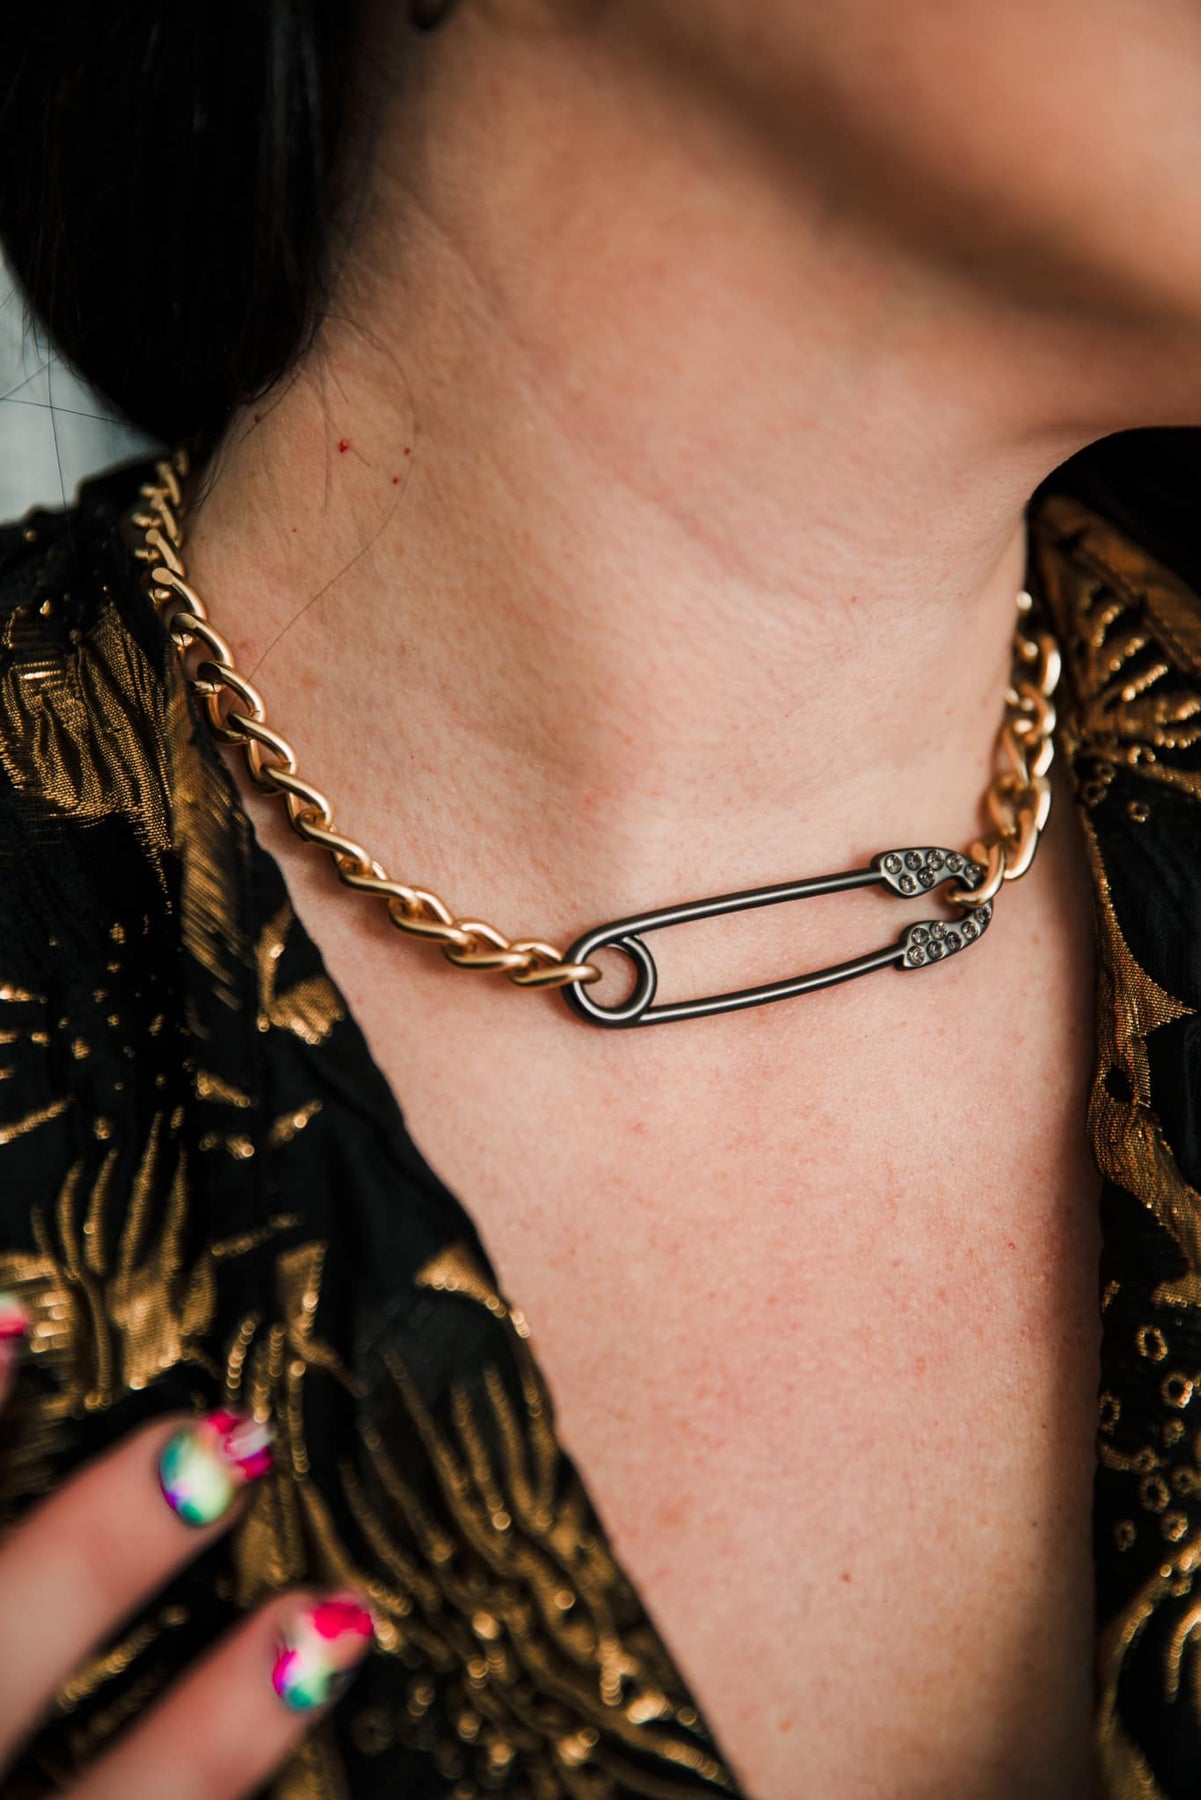 How To Make A Safety Pin Necklace